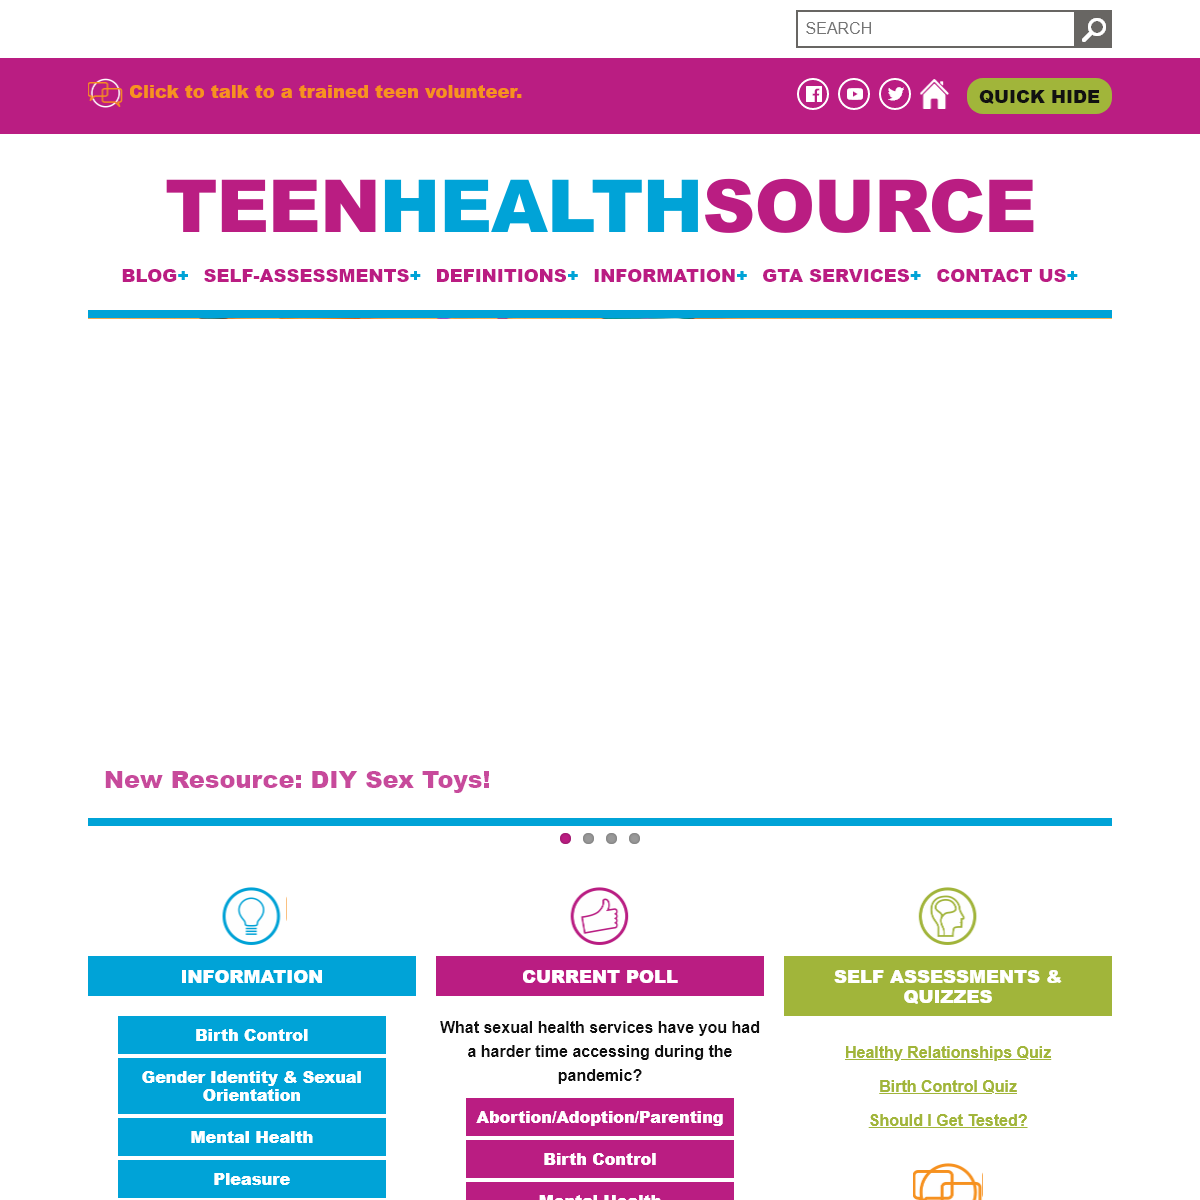 A complete backup of www.teenhealthsource.com